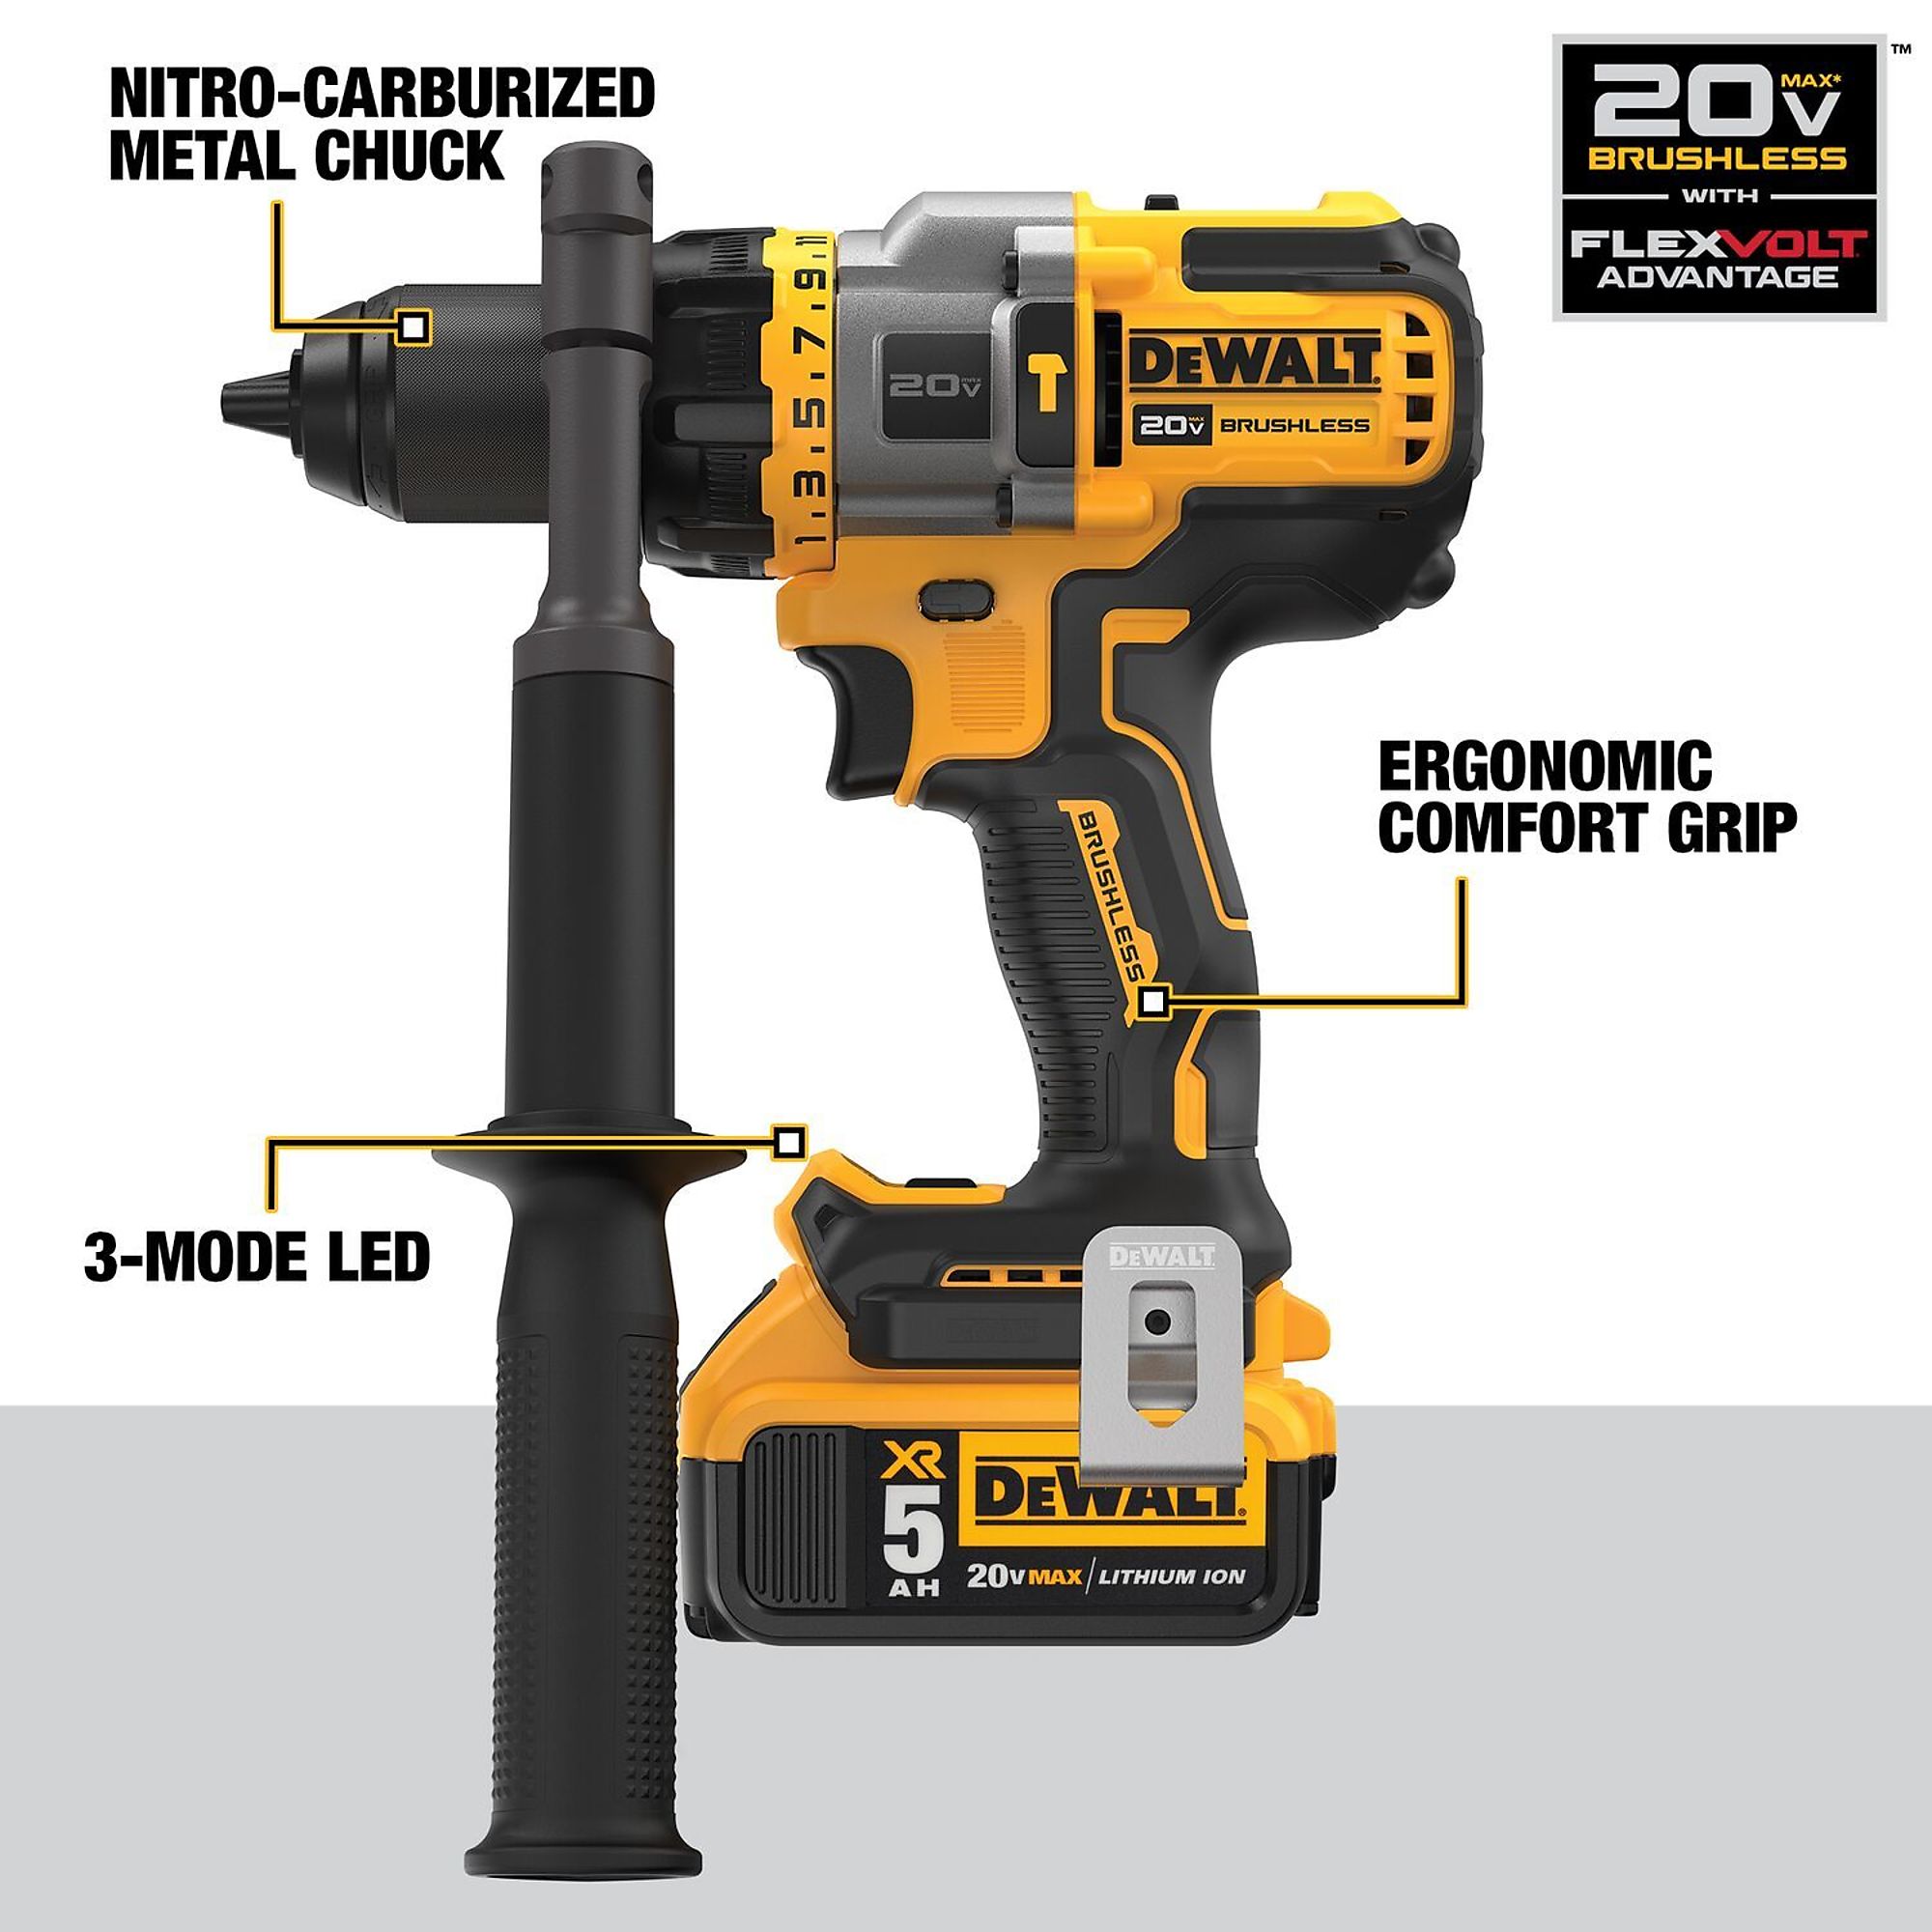 Dewalt DCK240C2 20V MAX Compact Lithium-Ion 1-2 in. Cordless Drill Driver-  1-4 in. Impact Driver Combo Kit (1.3 Ah)